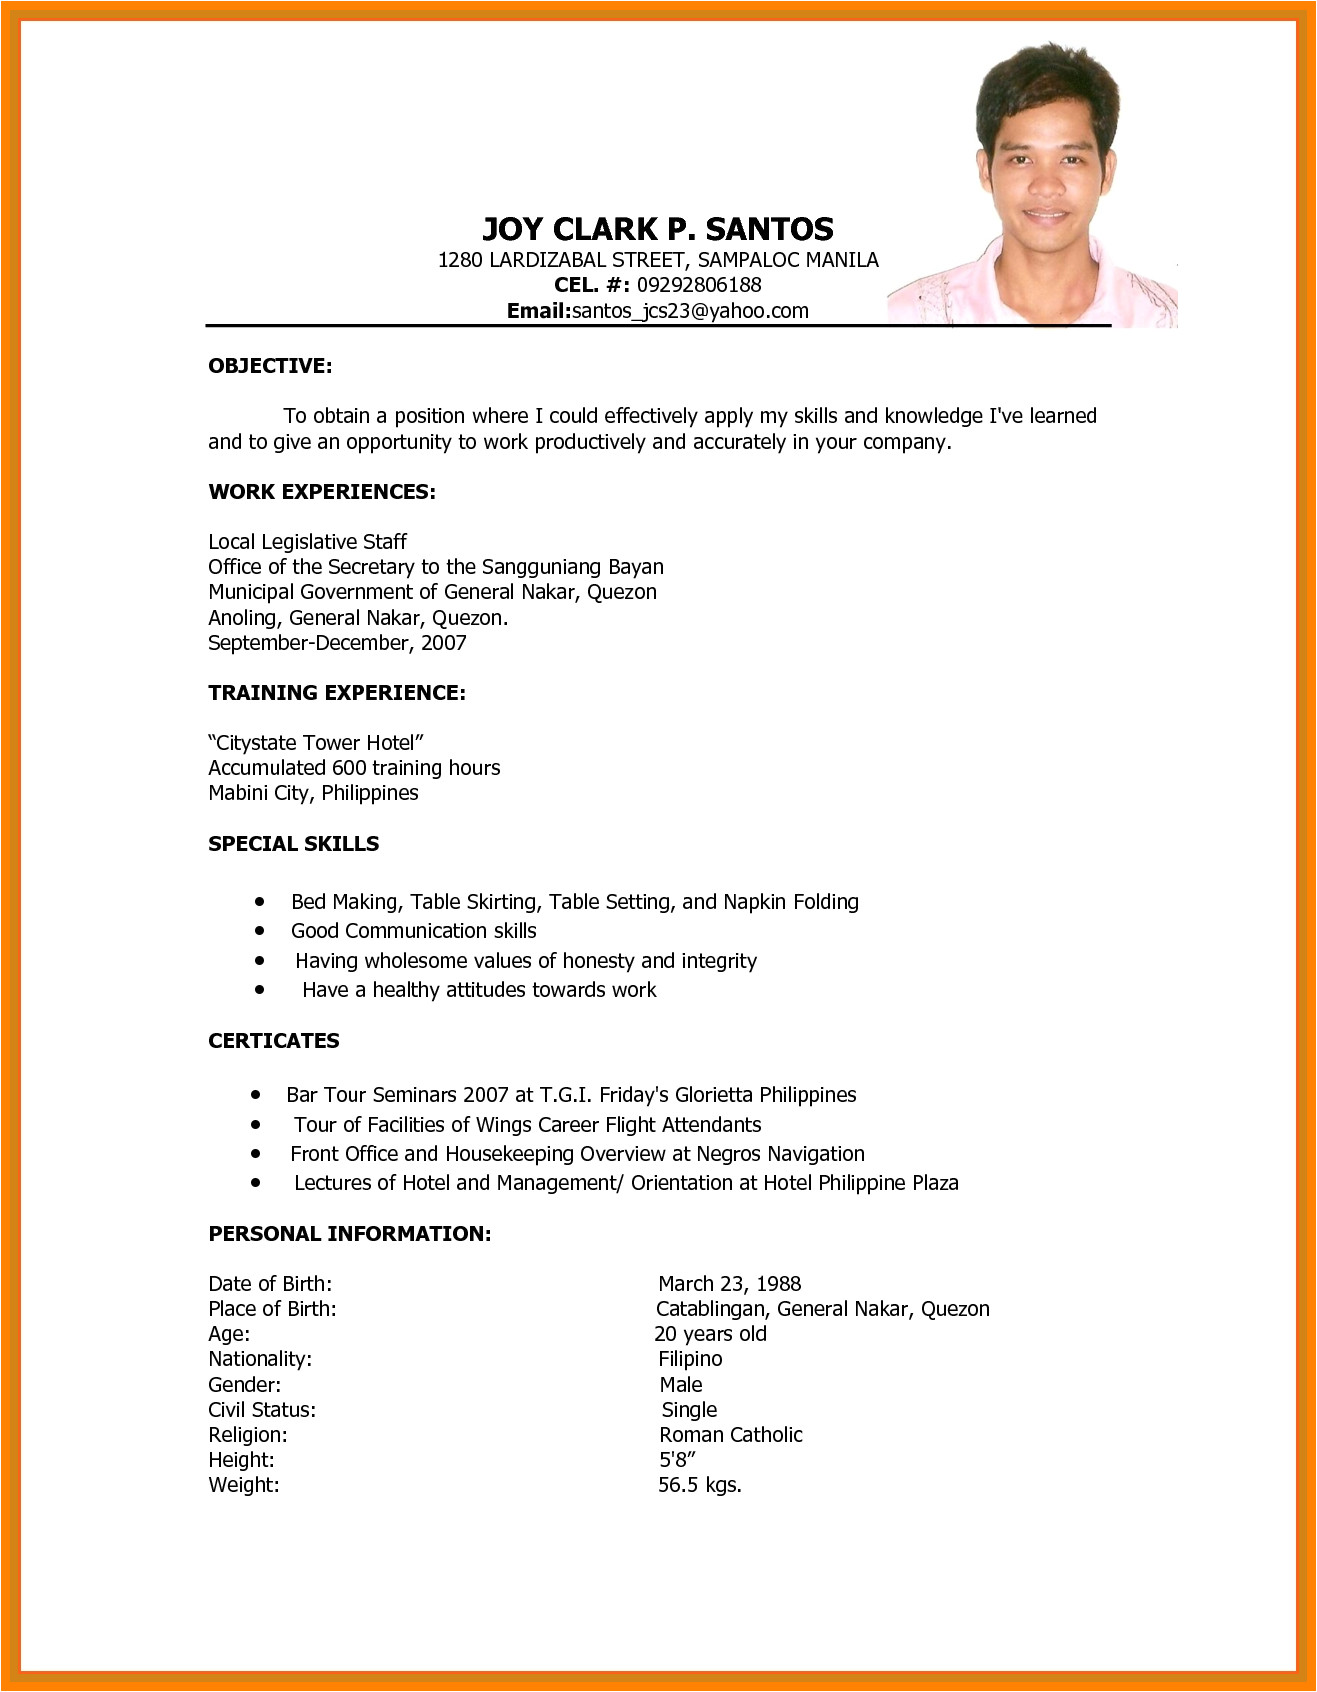 Resume format Sample for Job Application Philippines 6 Cv format Philippines theorynpractice